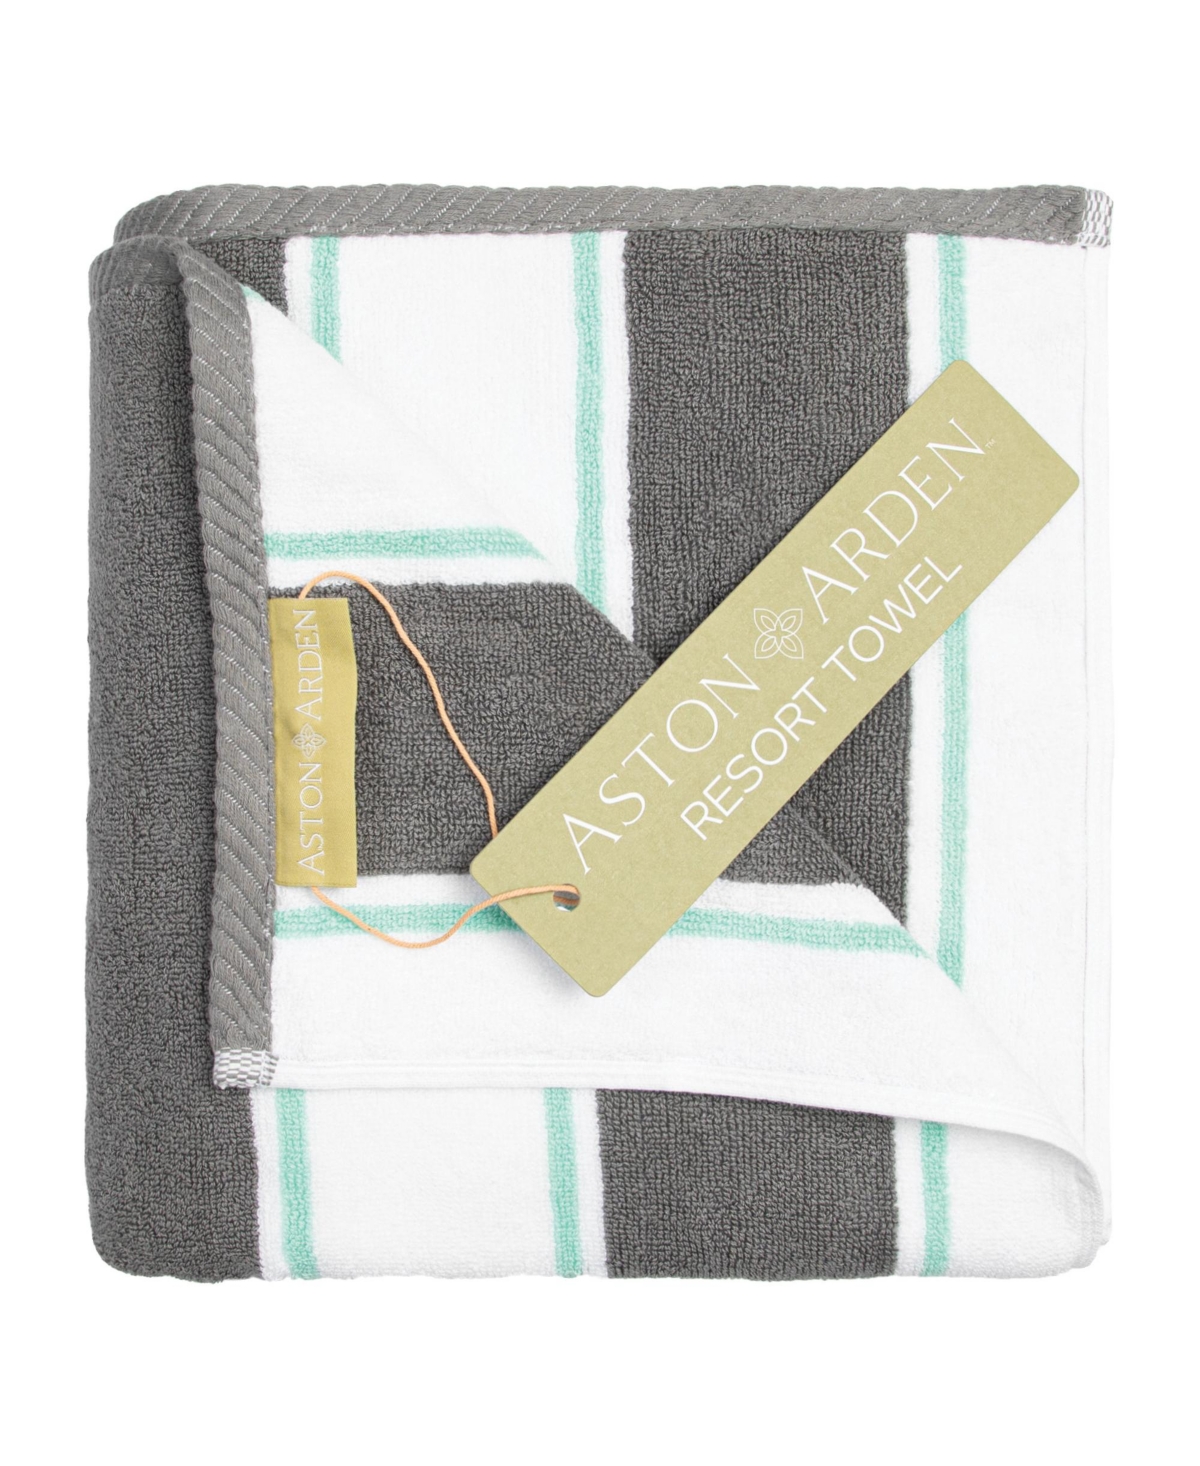 Aston And Arden Oversized Extra Thick Luxury Beach Towel (35x70 In., 600 Gsm), Pinstriped, Soft Ring Spun Cotton Res In Grey/green